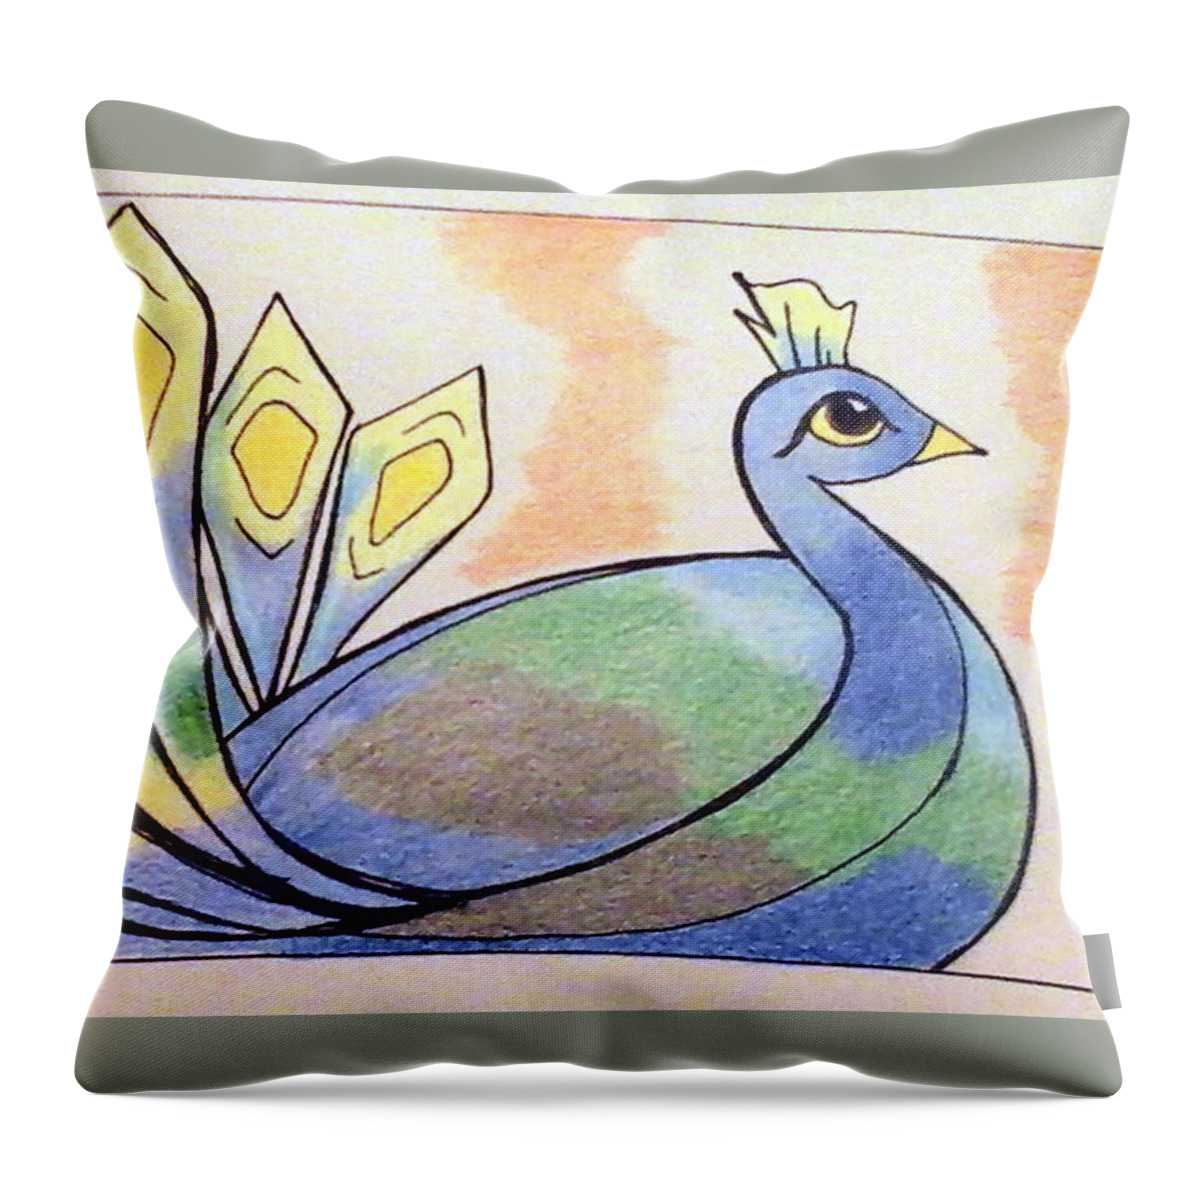 Coloring Throw Pillow featuring the drawing Peacock by Loretta Nash